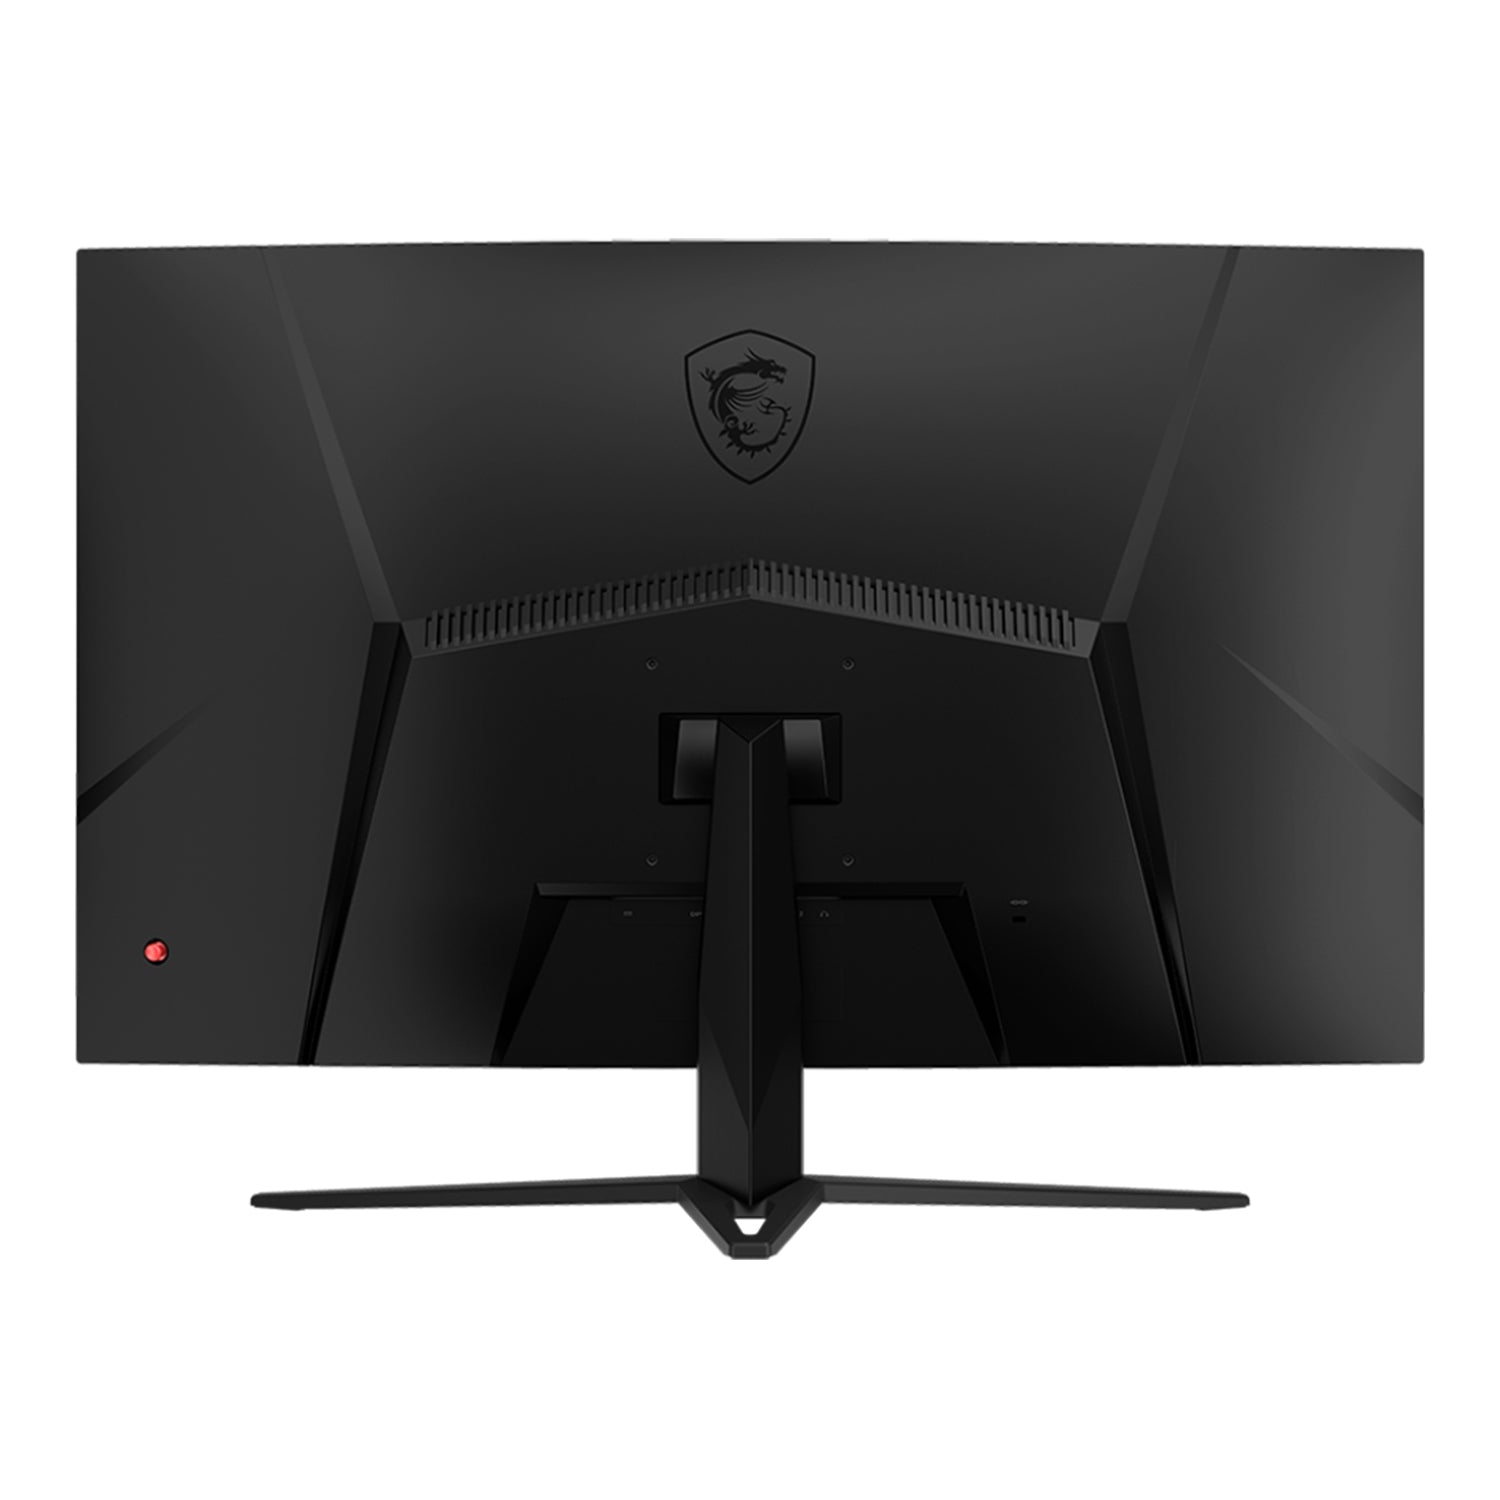 MSI (G32C4X) 32" Inch Curved VA Gaming Monitor - 1500R Curvature (250Hz Refresh Rate HDR Ready/ 1920 x 1080 Resolution with Adaptive Sync/ 1x DisplayPort 1.2a - 2x HDMI 2.0)